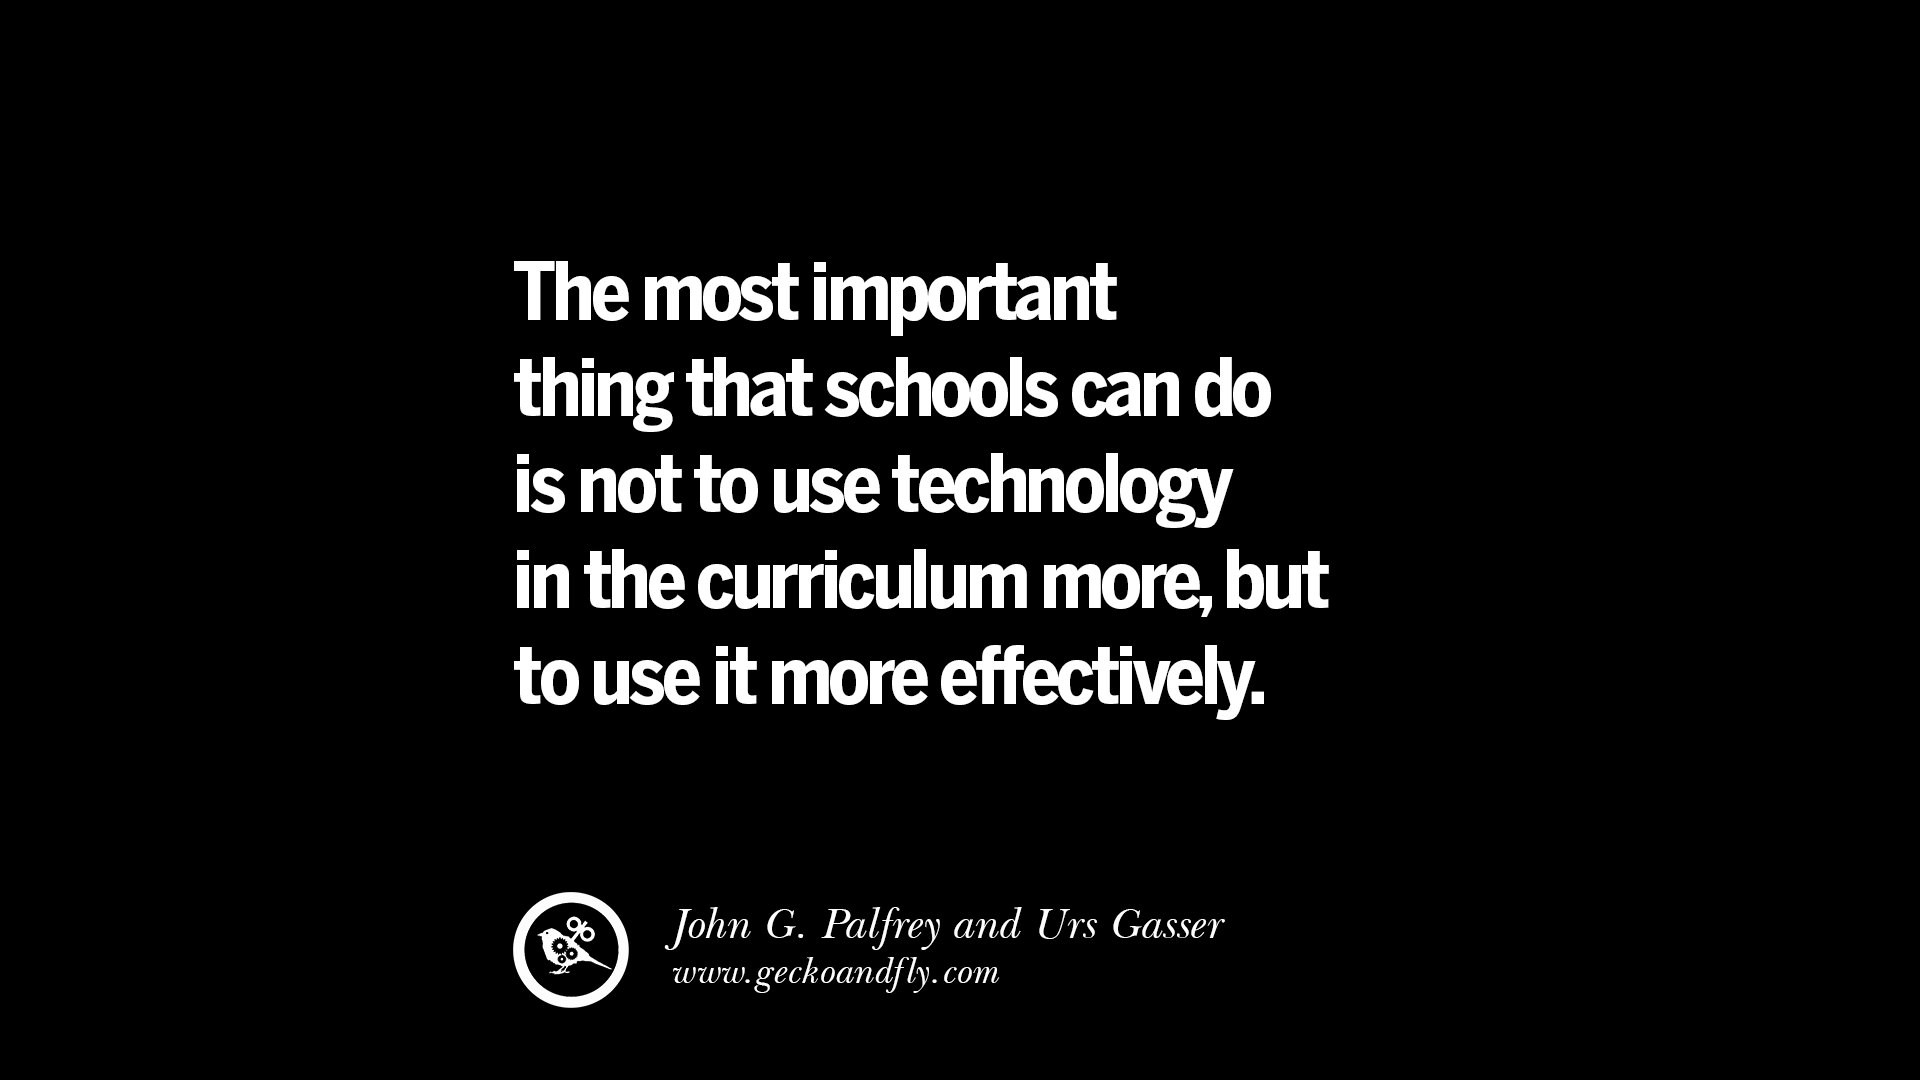 Technology And Education Quotes
 Quotes on Education The most important thing that schools